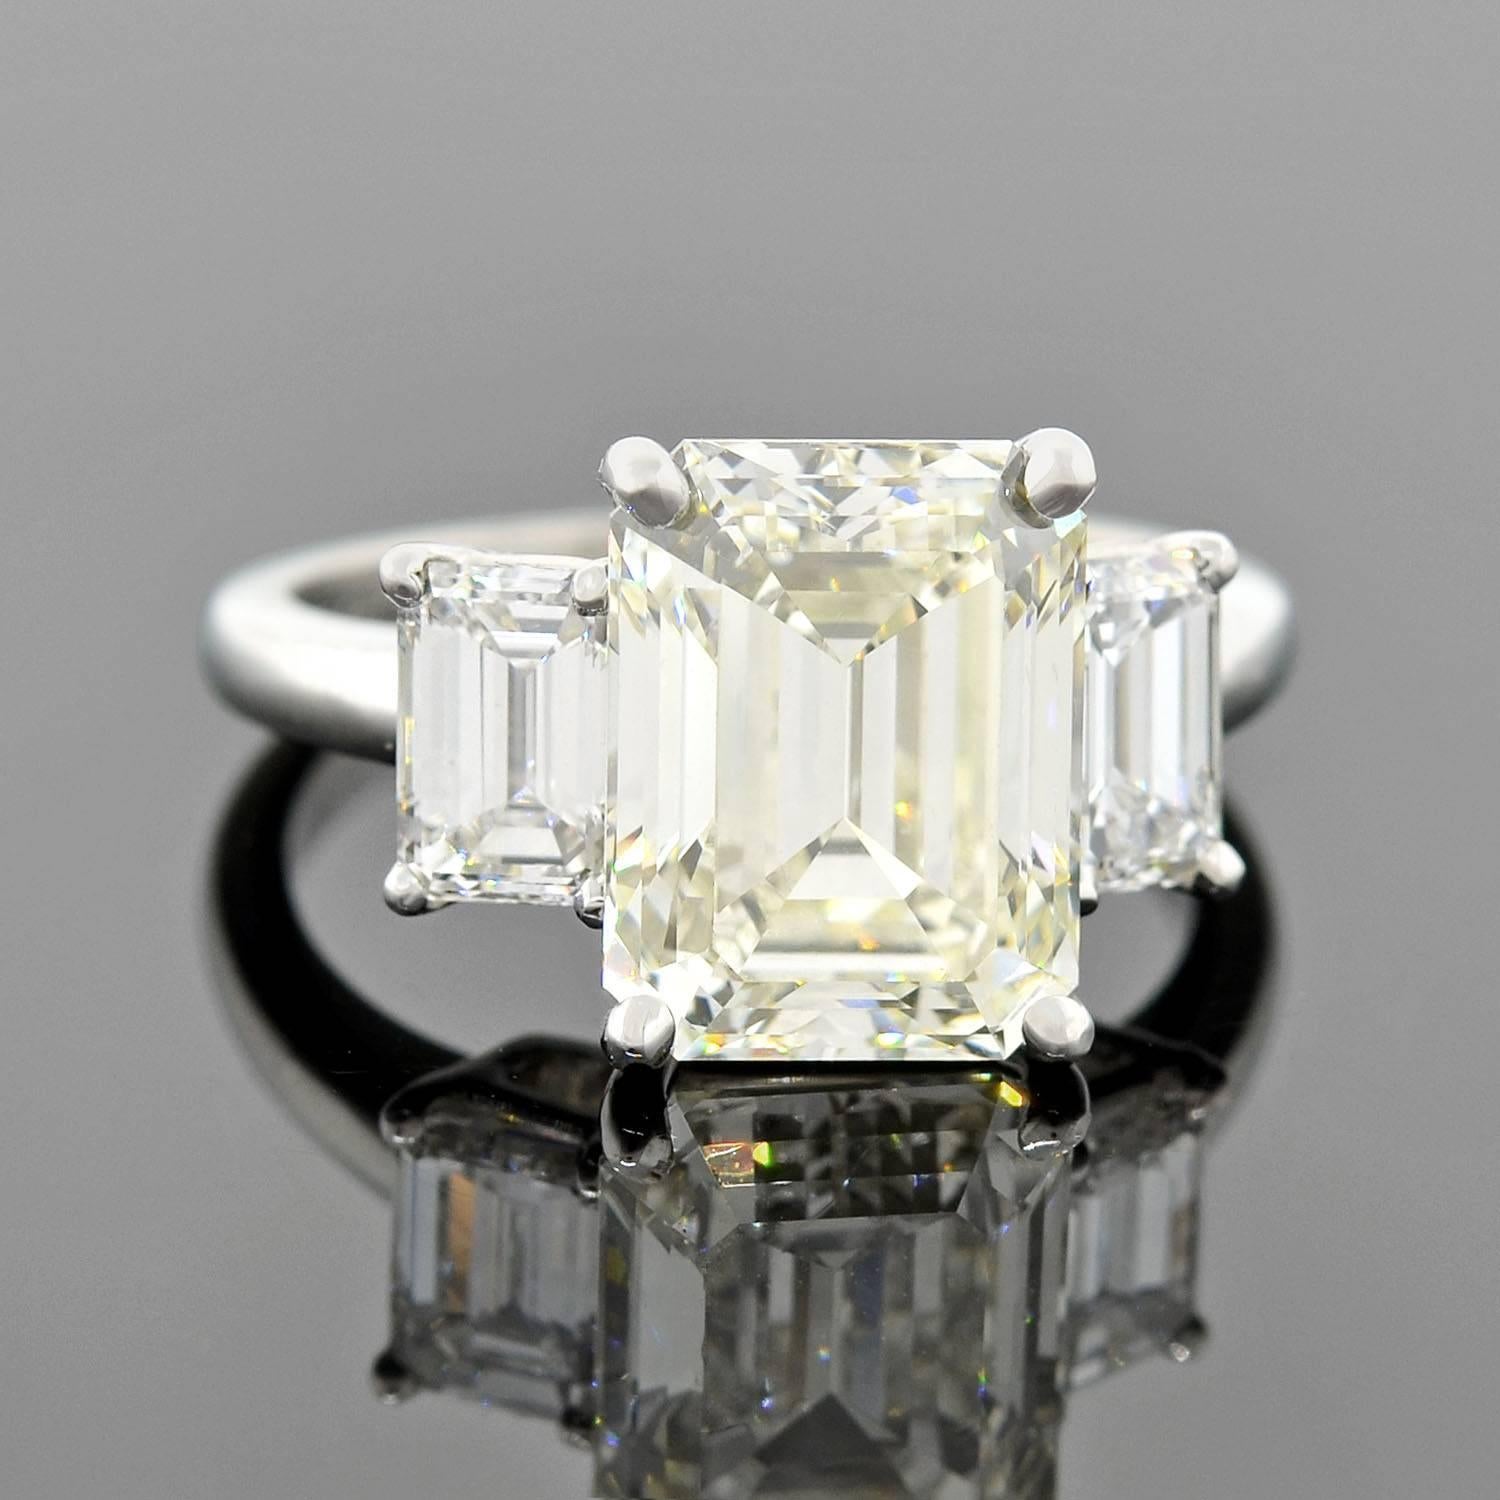 An exquisite Estate diamond engagement ring! Made of platinum, this gorgeous piece features a stunning Emerald Cut diamond, which weighs 4.13ct with M color and SI1 clarity. The diamond stone is held within a raised 4-prong setting and sits